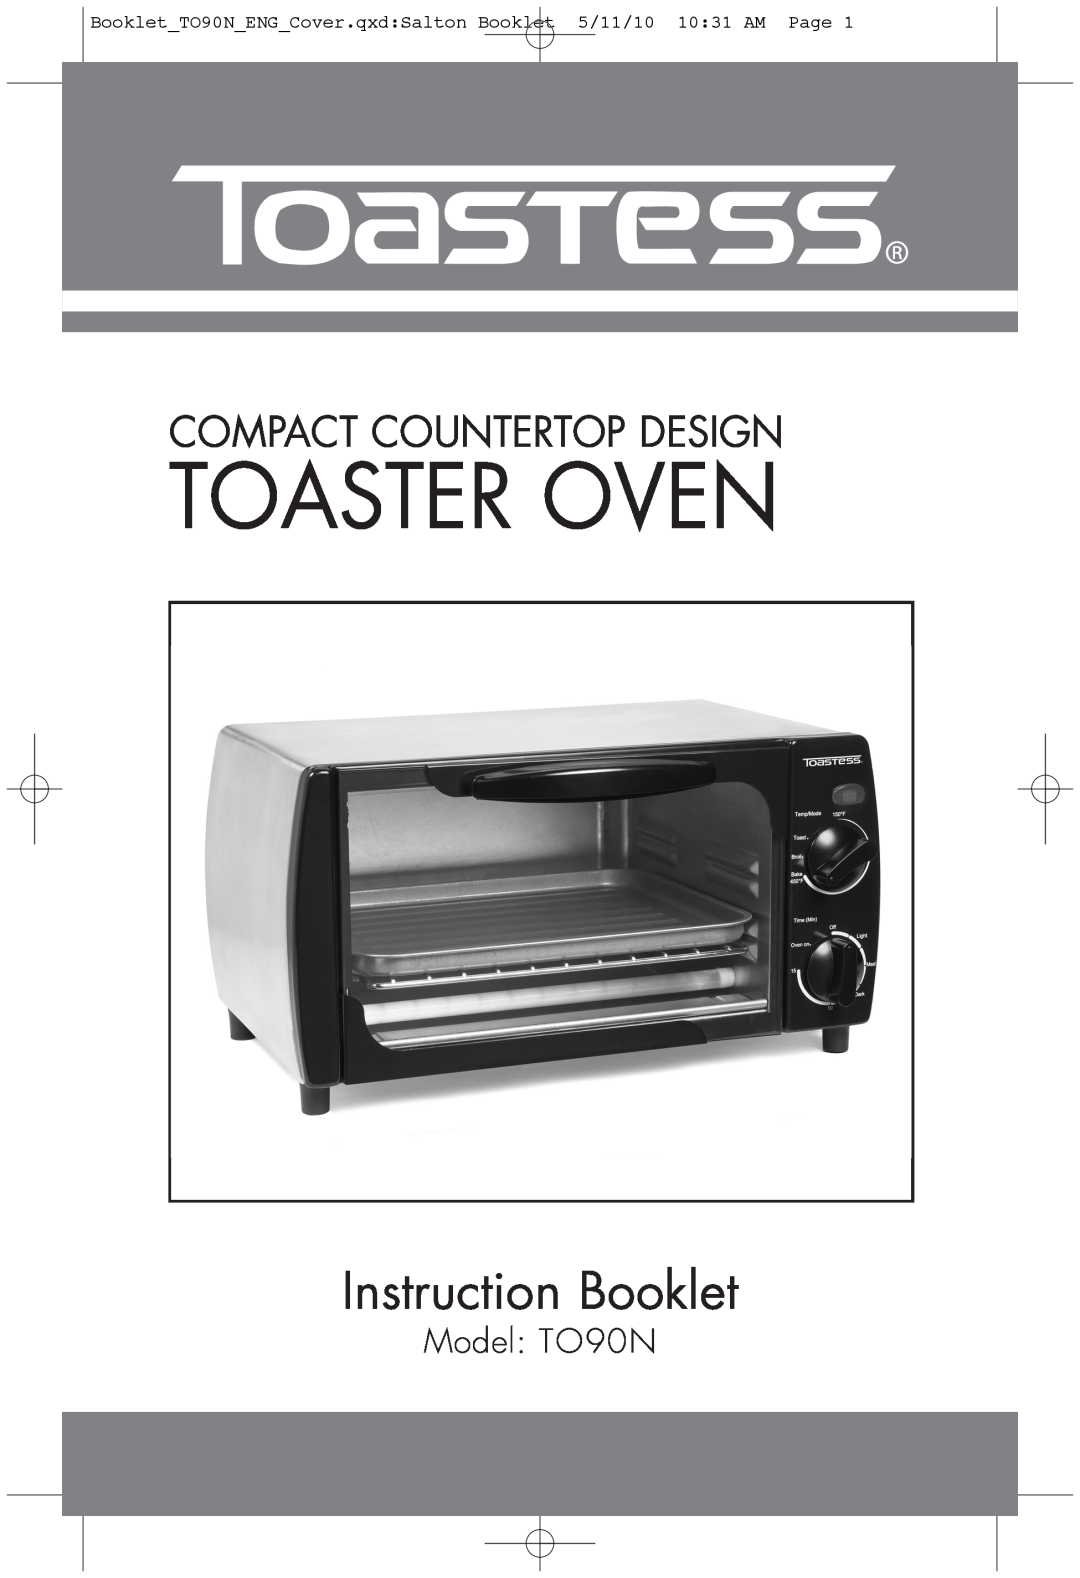 Toastess manual Model TO90N, Toaster Oven, Instruction Booklet, Compact Countertop Design 